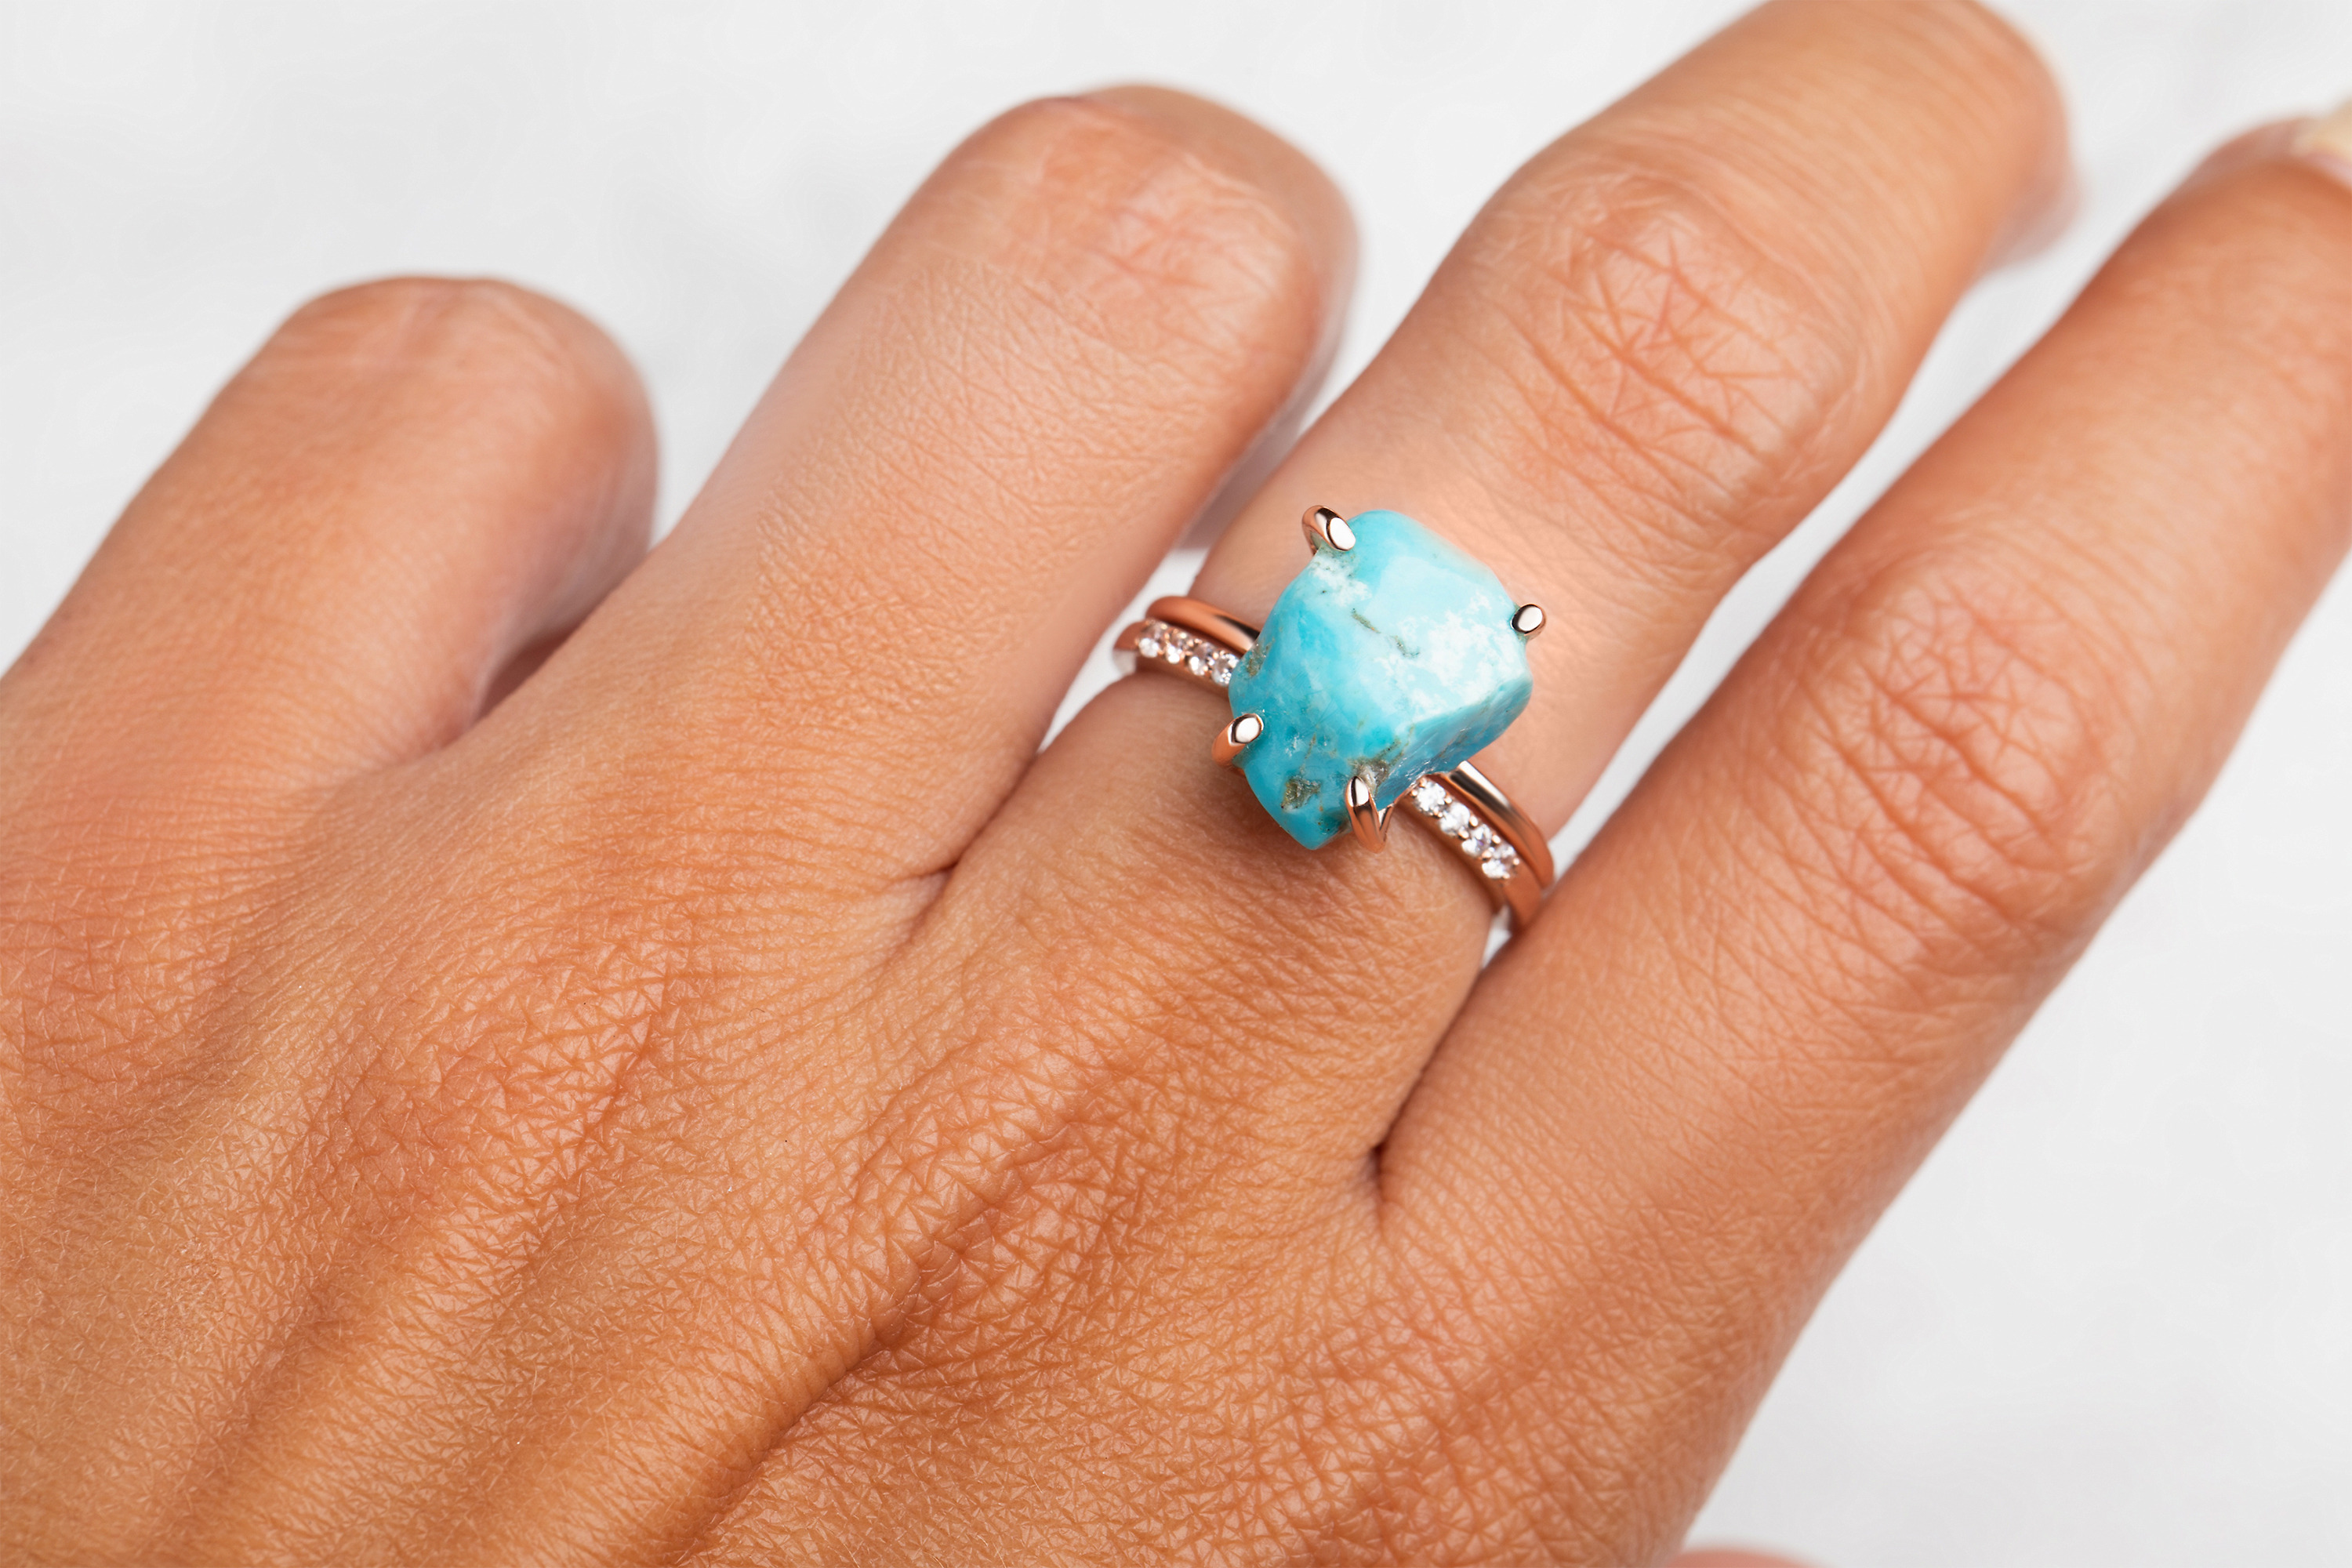 The Raw Crystal Ring Aquamarine is presented with another stackable ring on a woman's hand.